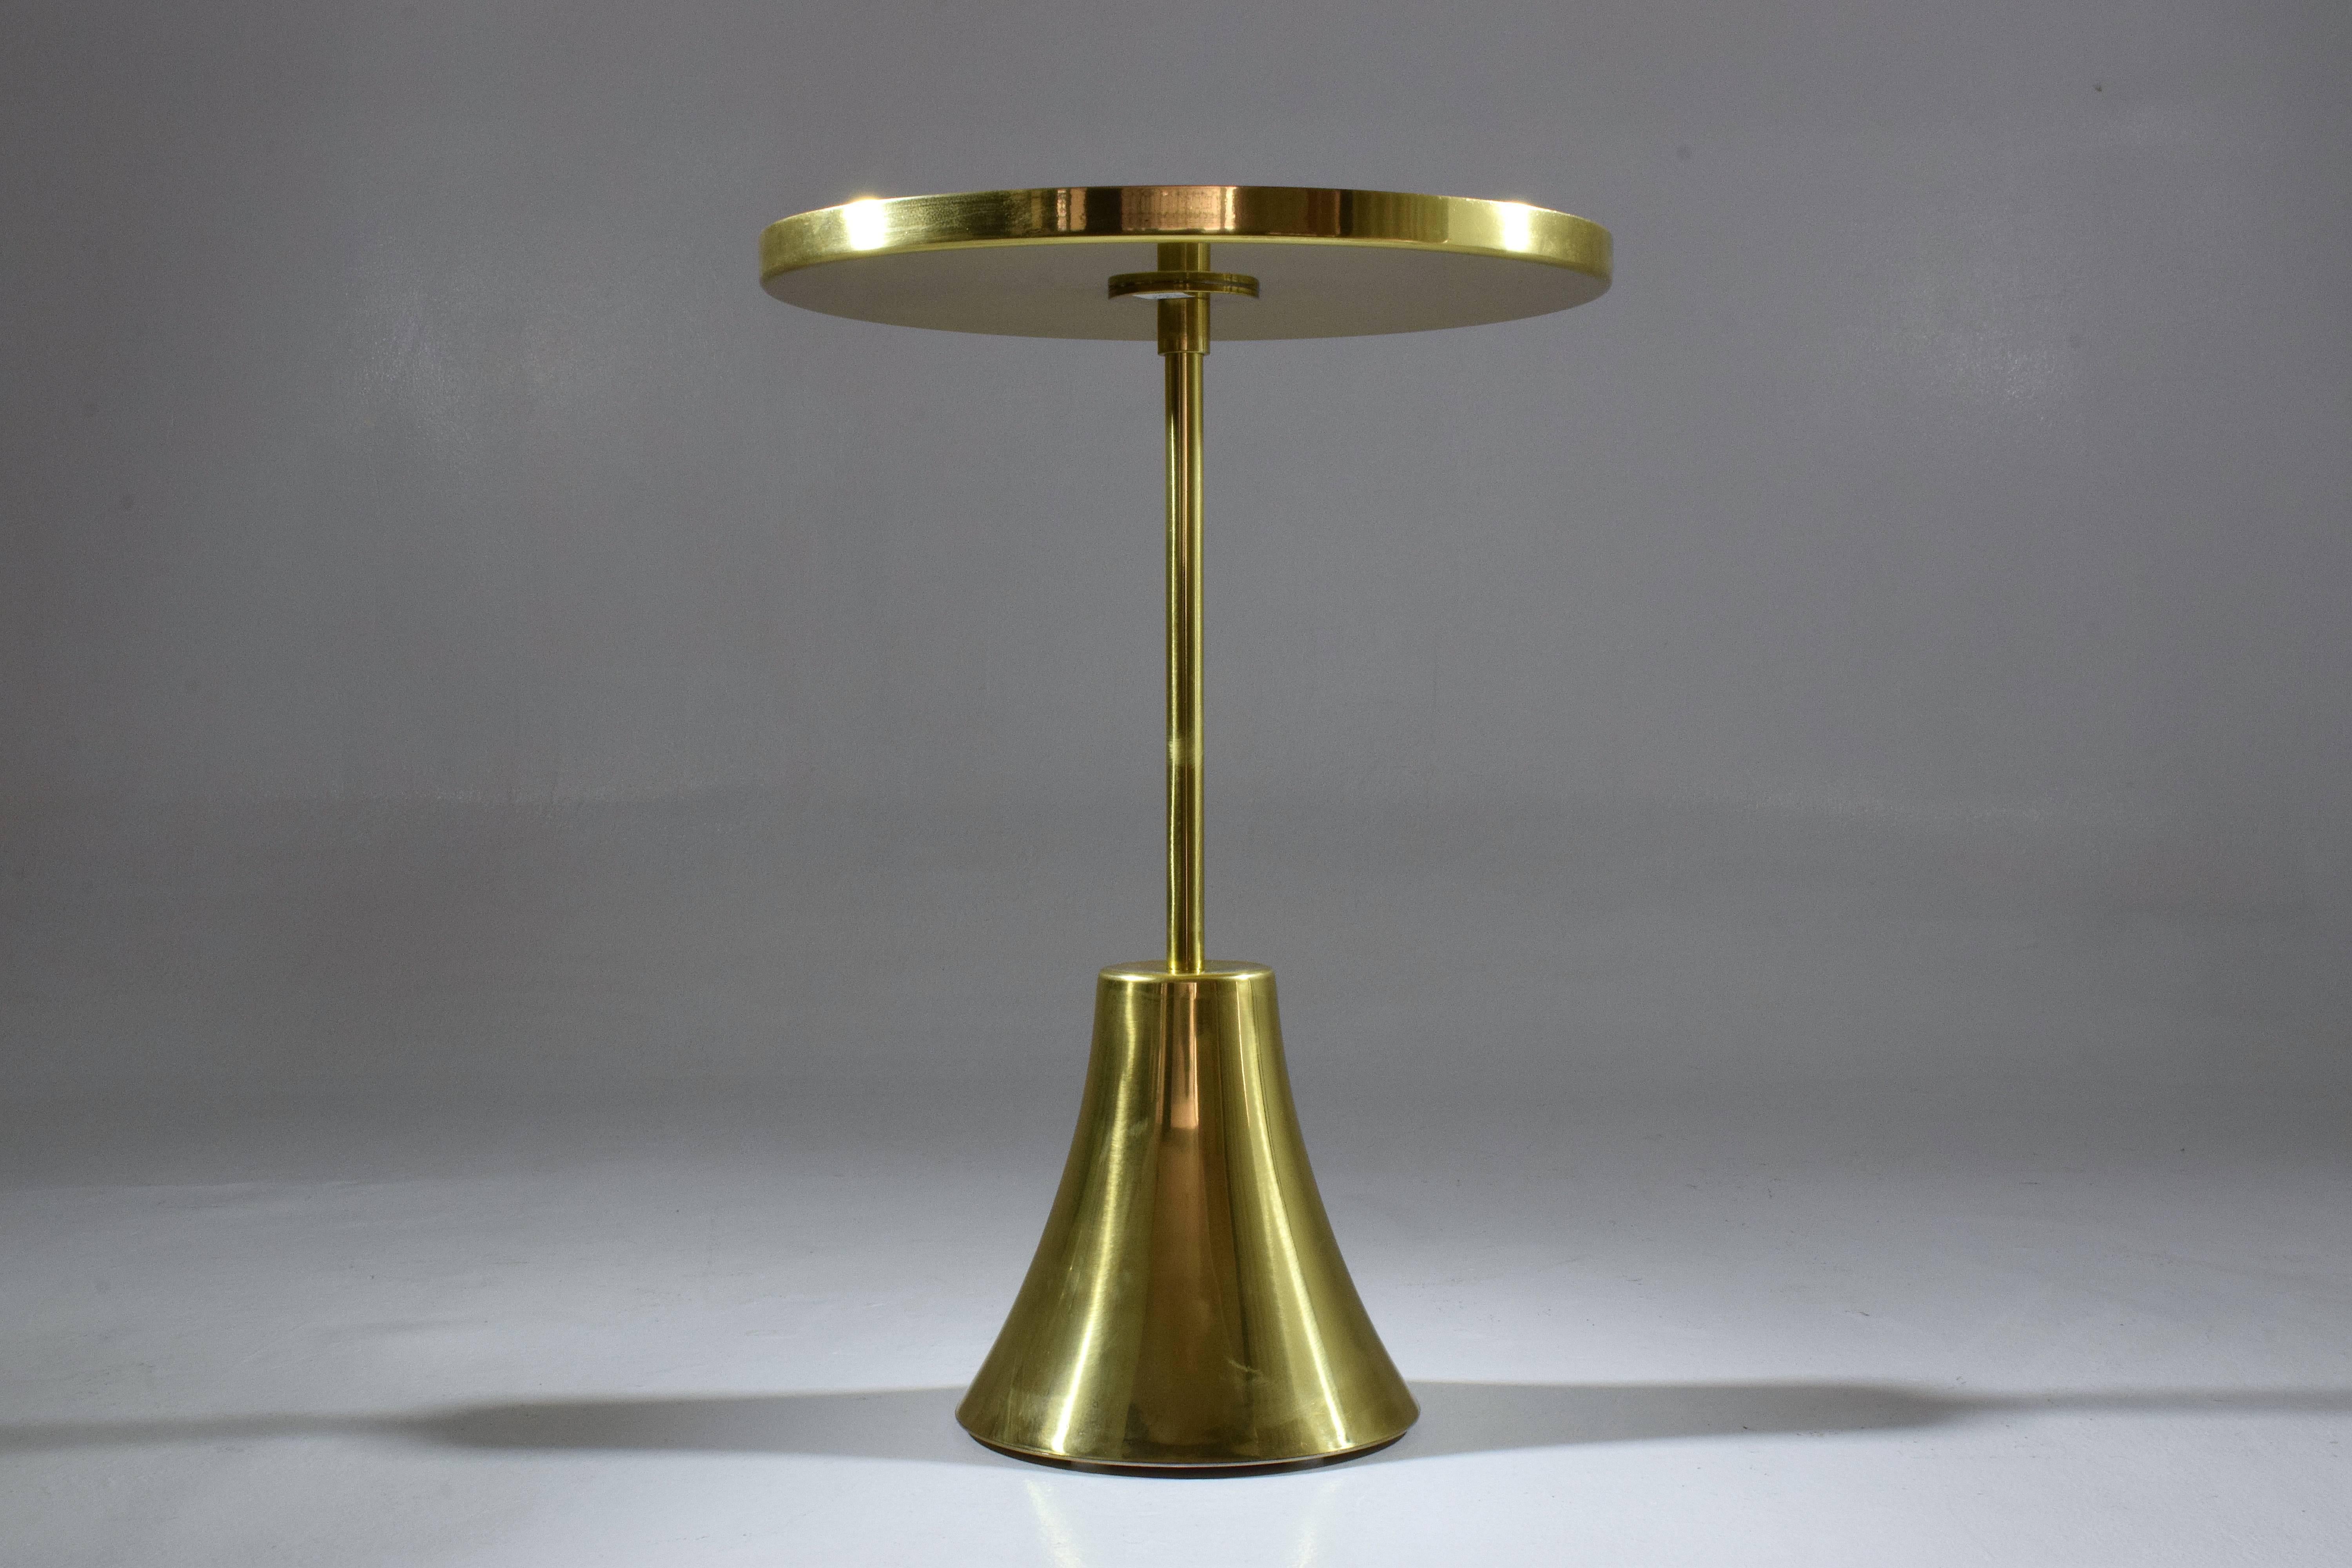 French Zel-Ora Contemporary Brass Mosaic Side Table, Flow Collection For Sale